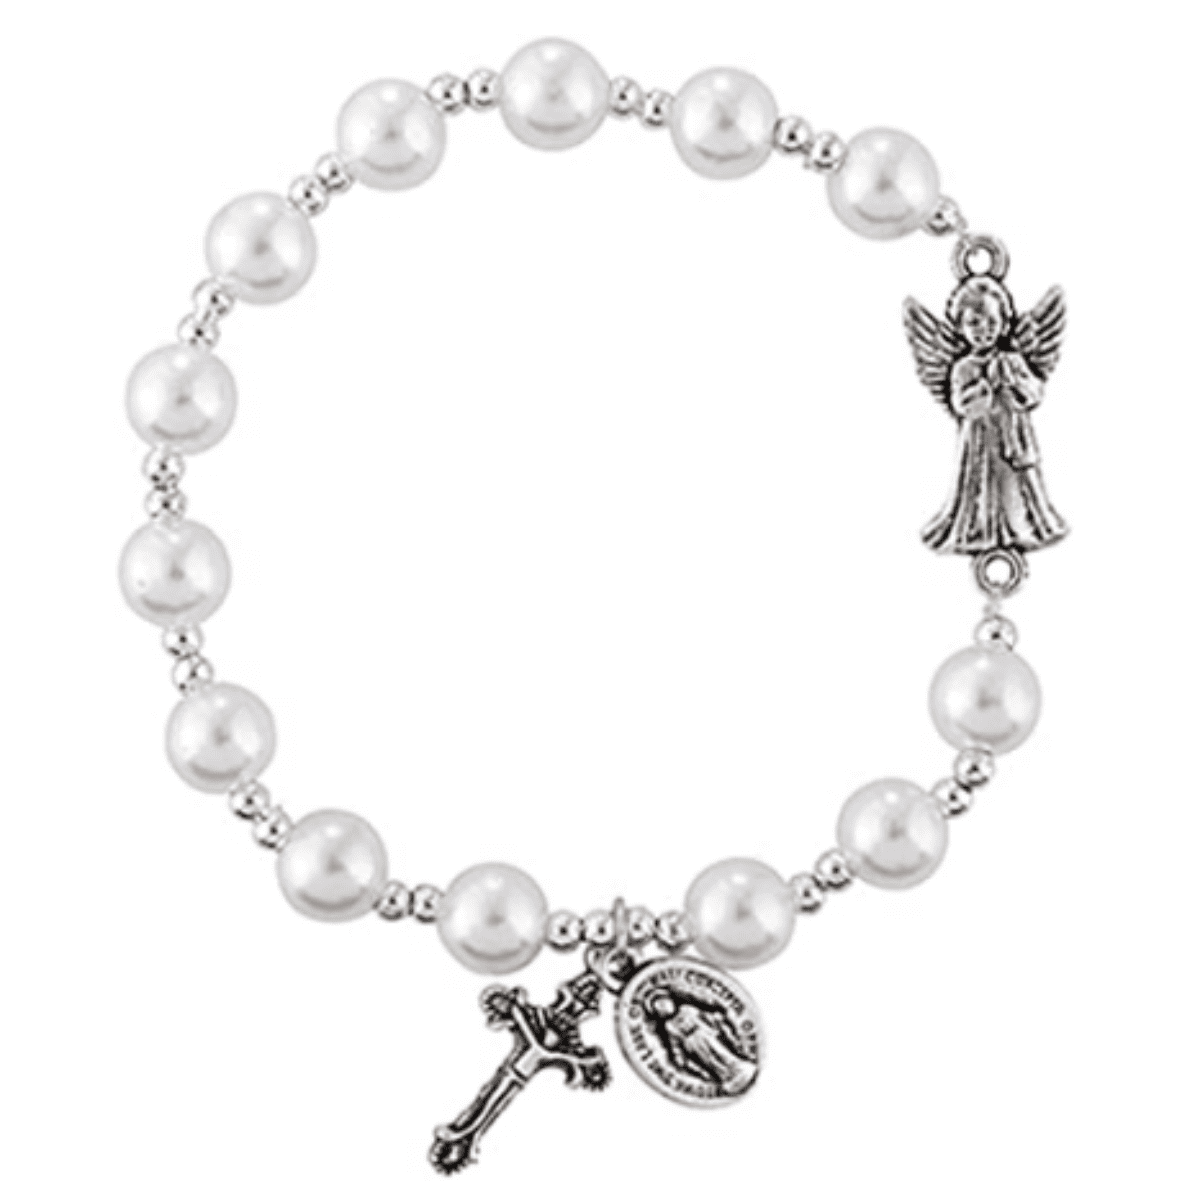 Bonyak Jewelry Guardian Angel W/Child Silver Plate Rosary Bracelet 6mm Fire Polished Beads Every Birth Month Color